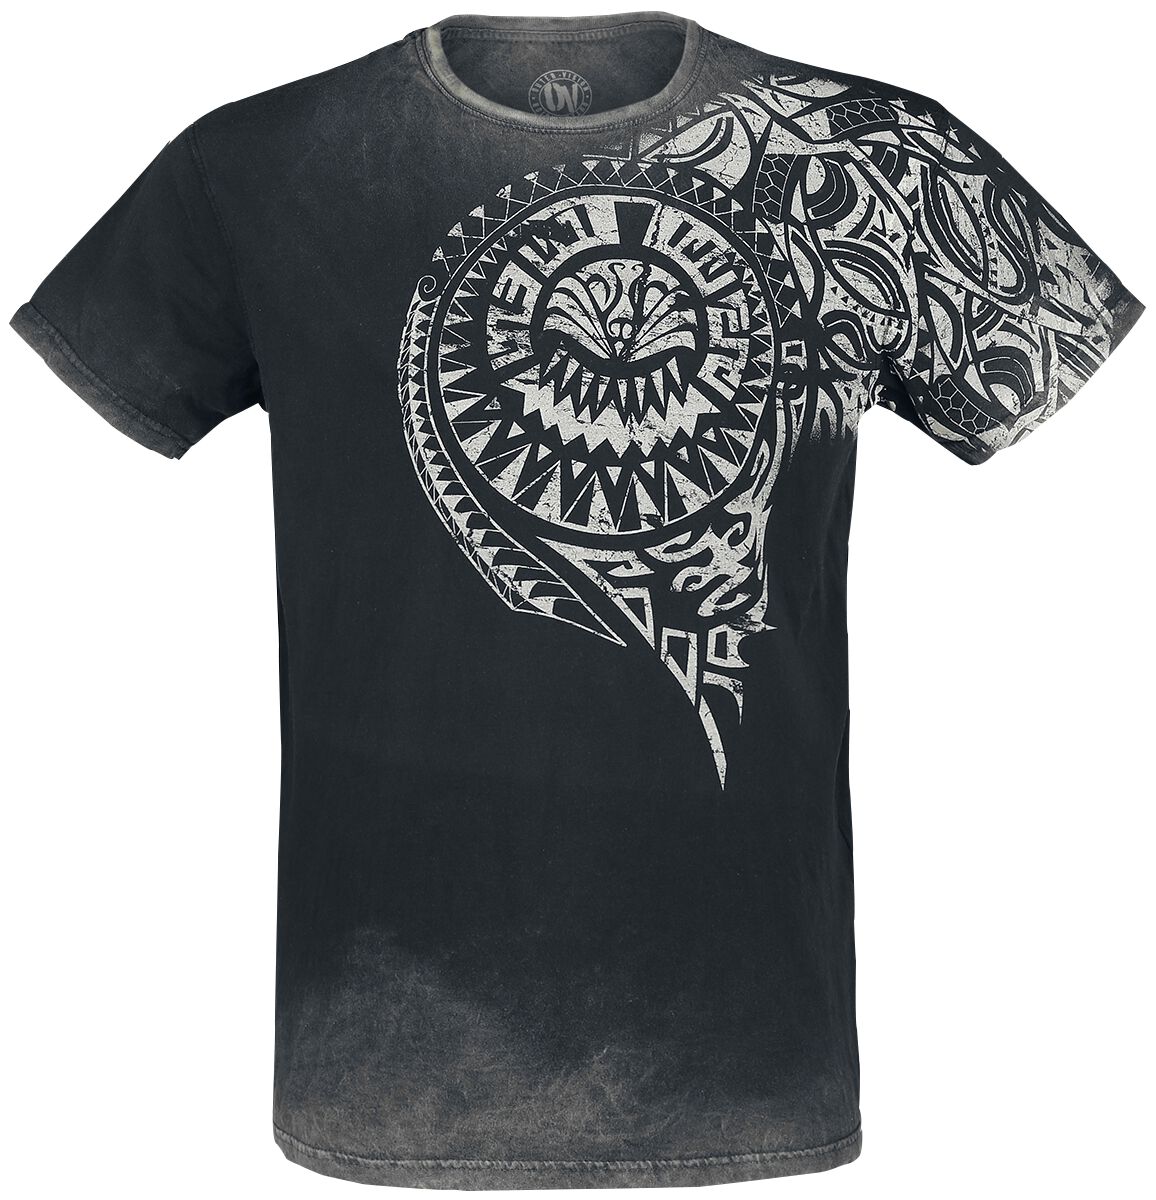 Image of T-Shirt di Outer Vision - Burned Tattoo - S a 4XL - Uomo - grigio